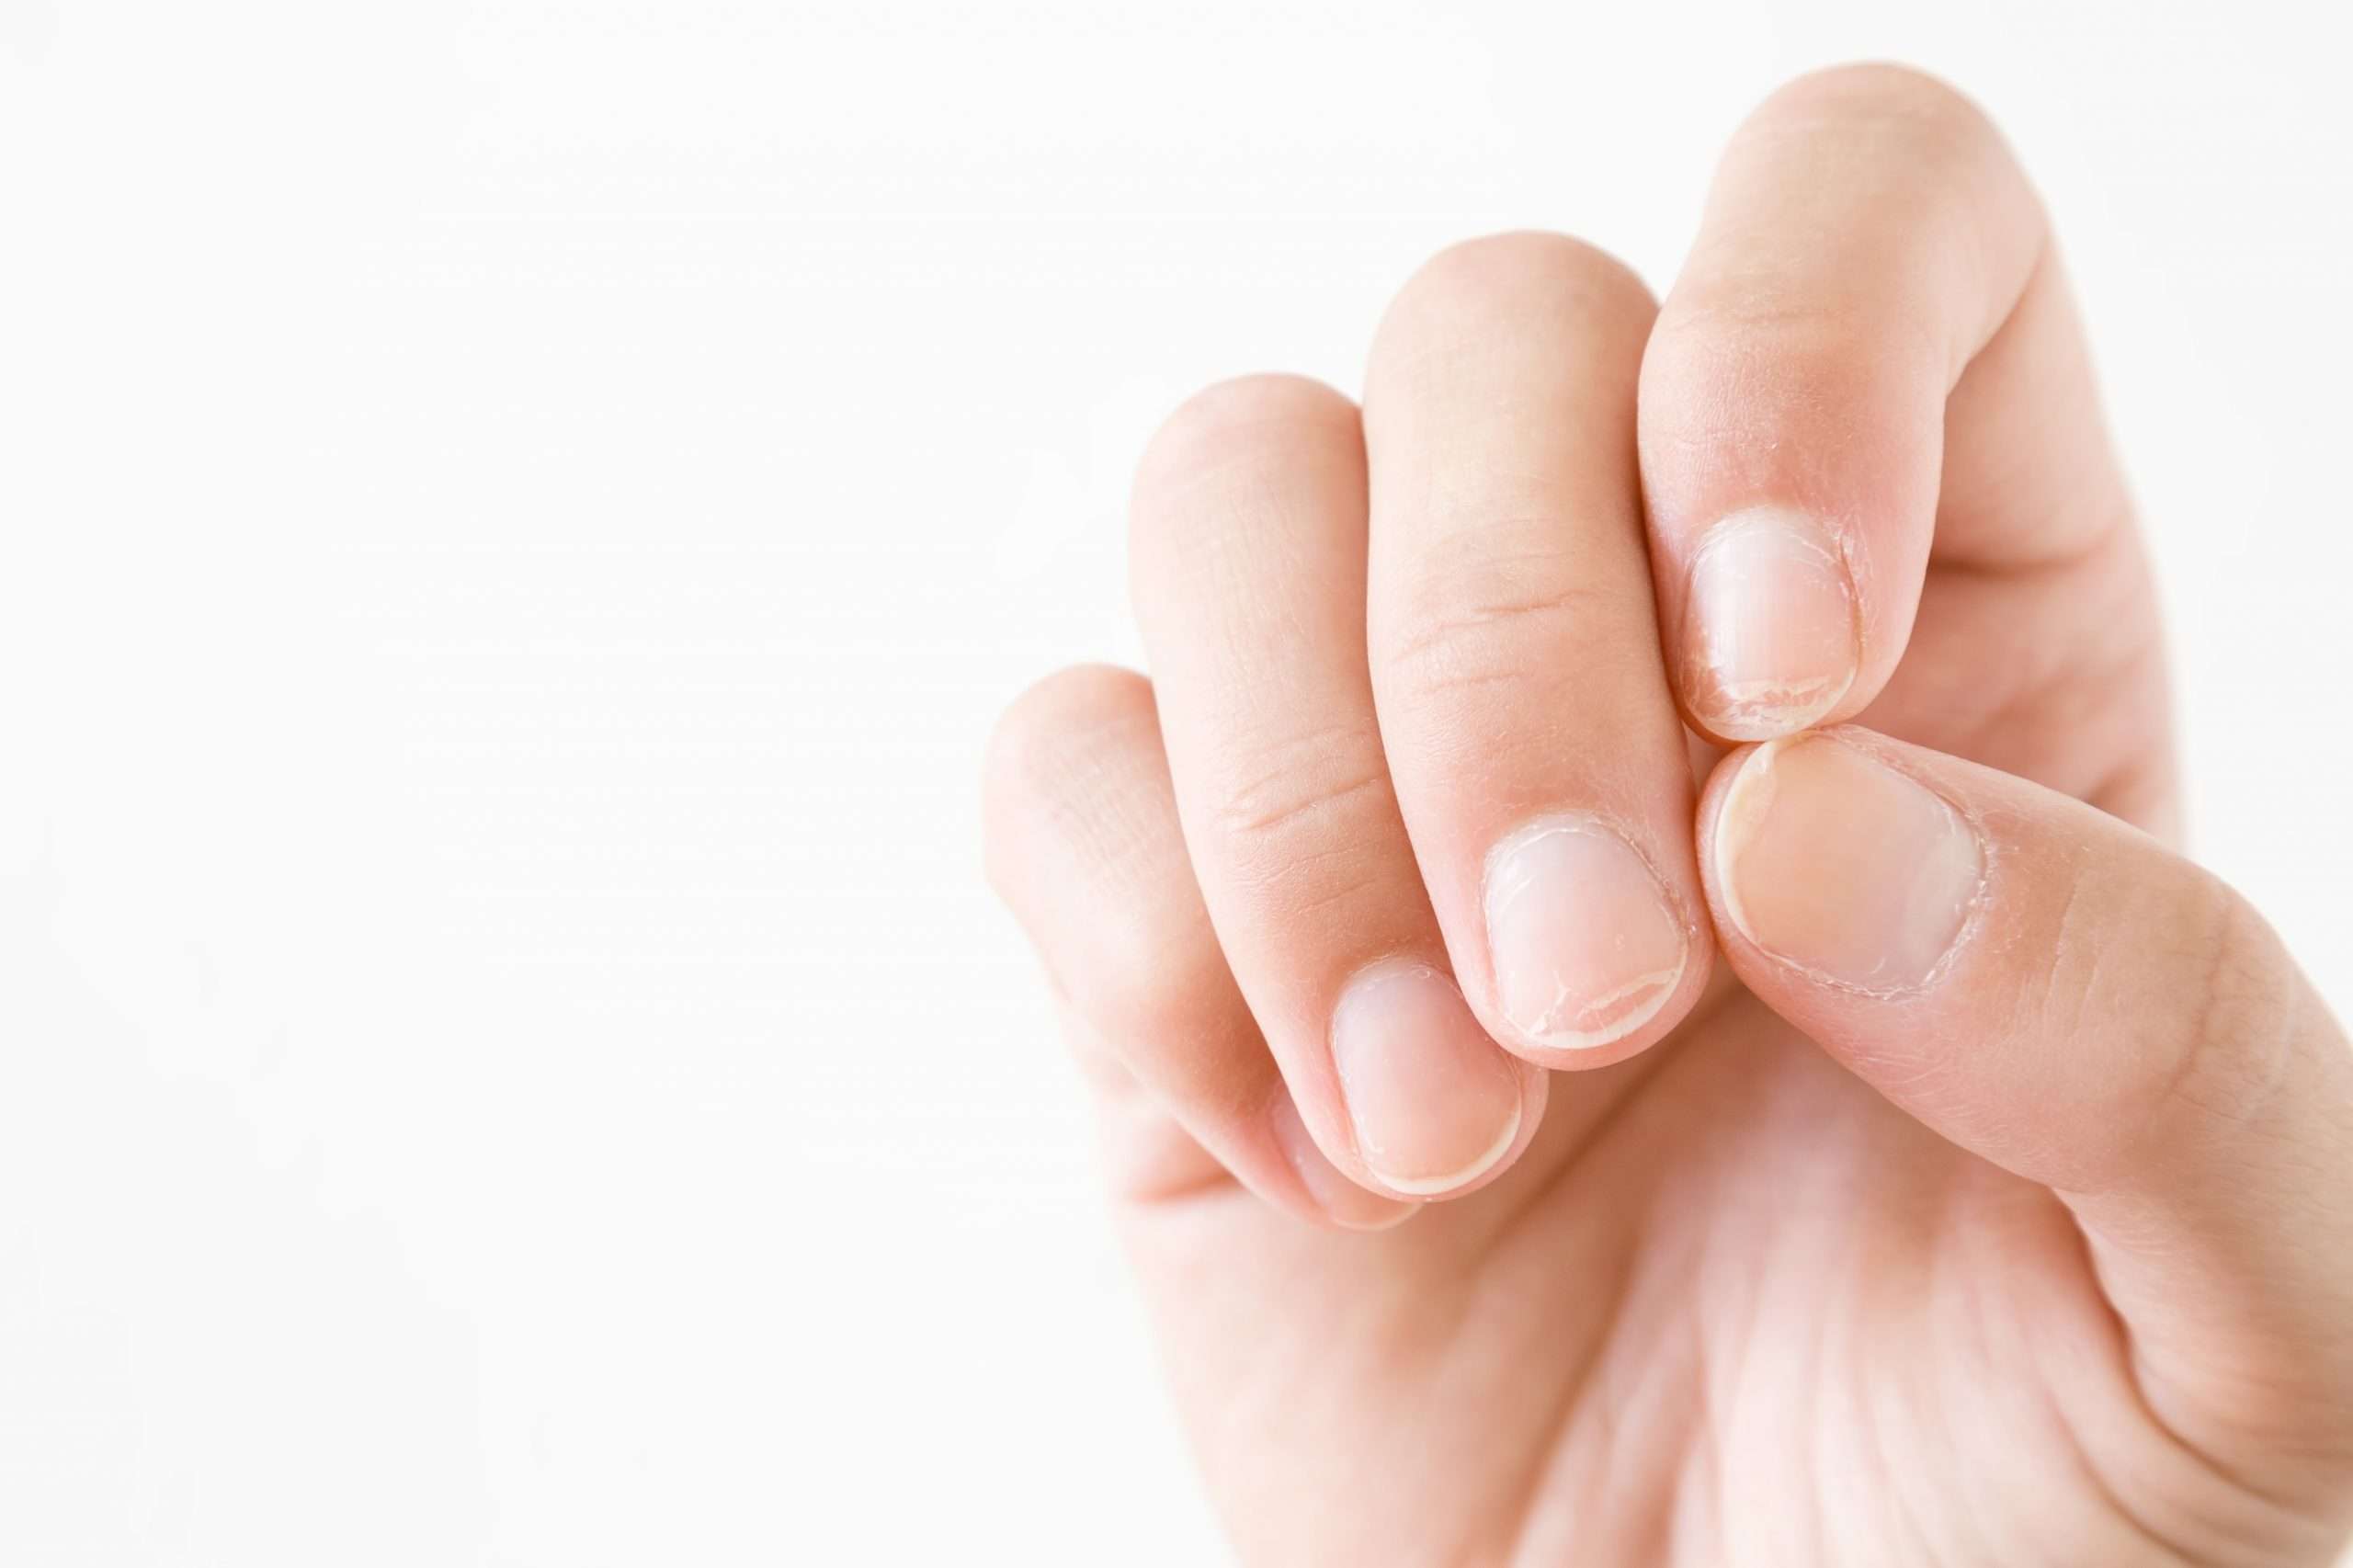 What Can You Do About Brittle Nails?